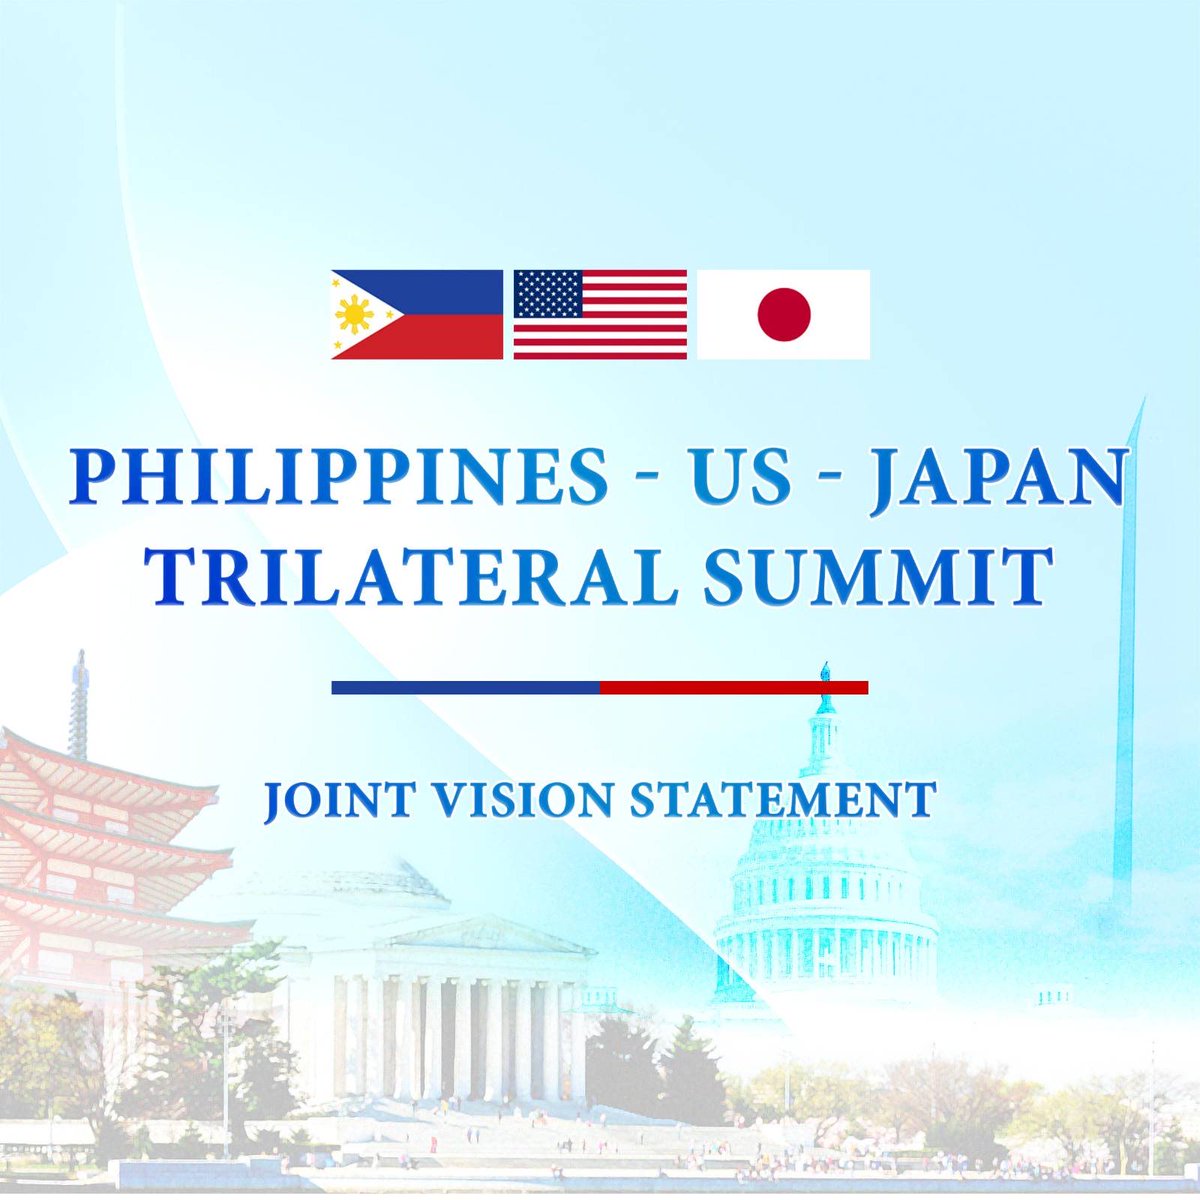 READ: Philippines-US-Japan Trilateral Summit Joint Vision Statement pco.gov.ph/Joint-vision-s…